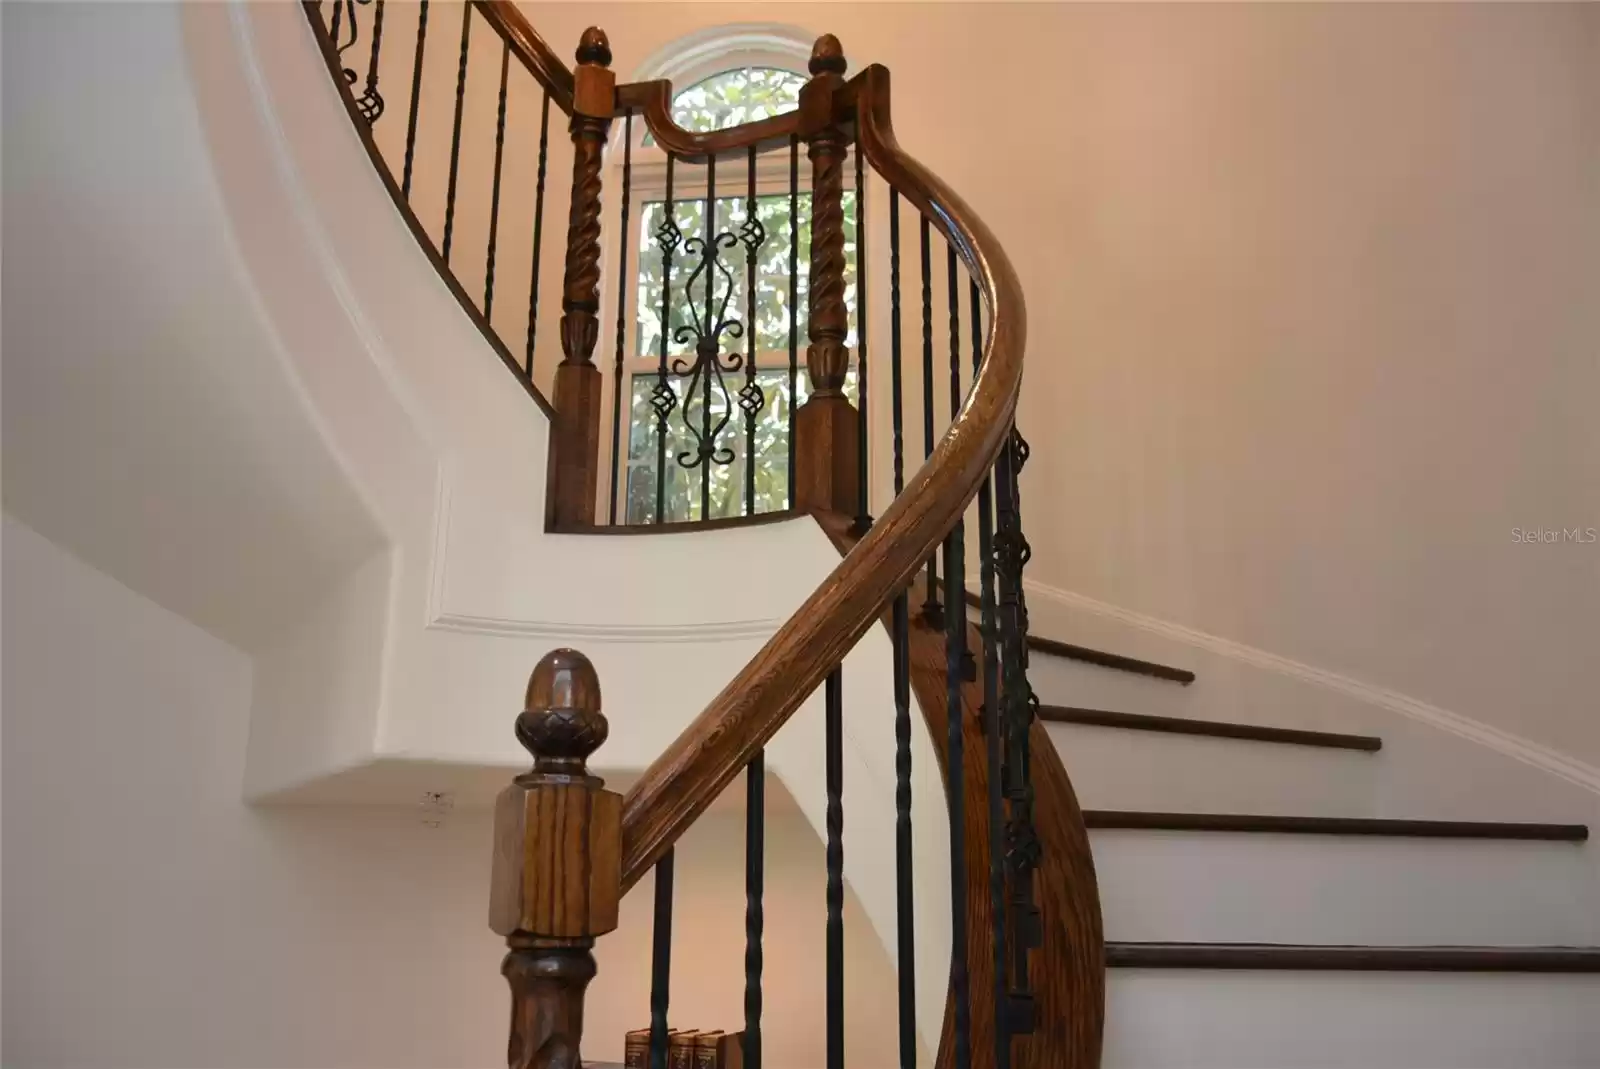 Interior features include an elegant hardwood and wrought-iron spiral staircase rising to the top of the turret and providing access to the treetop terrace a hidden room and bonus storage space